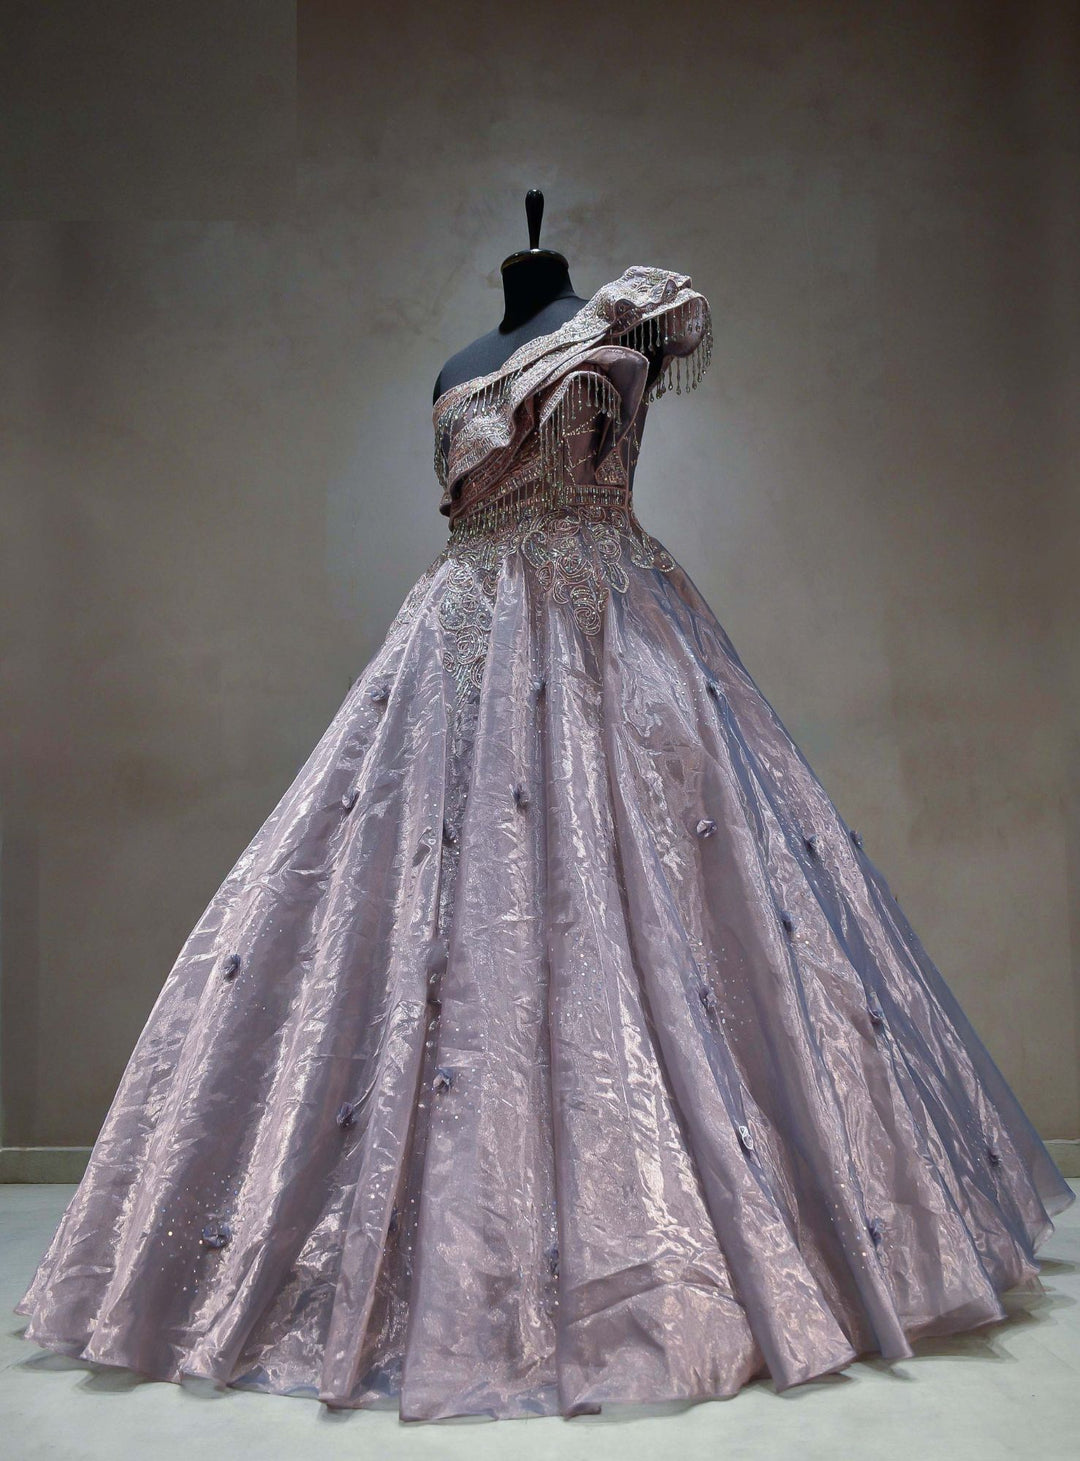 Meraj couture's Ruffled Glass Tissue Lavender Gown - RENT